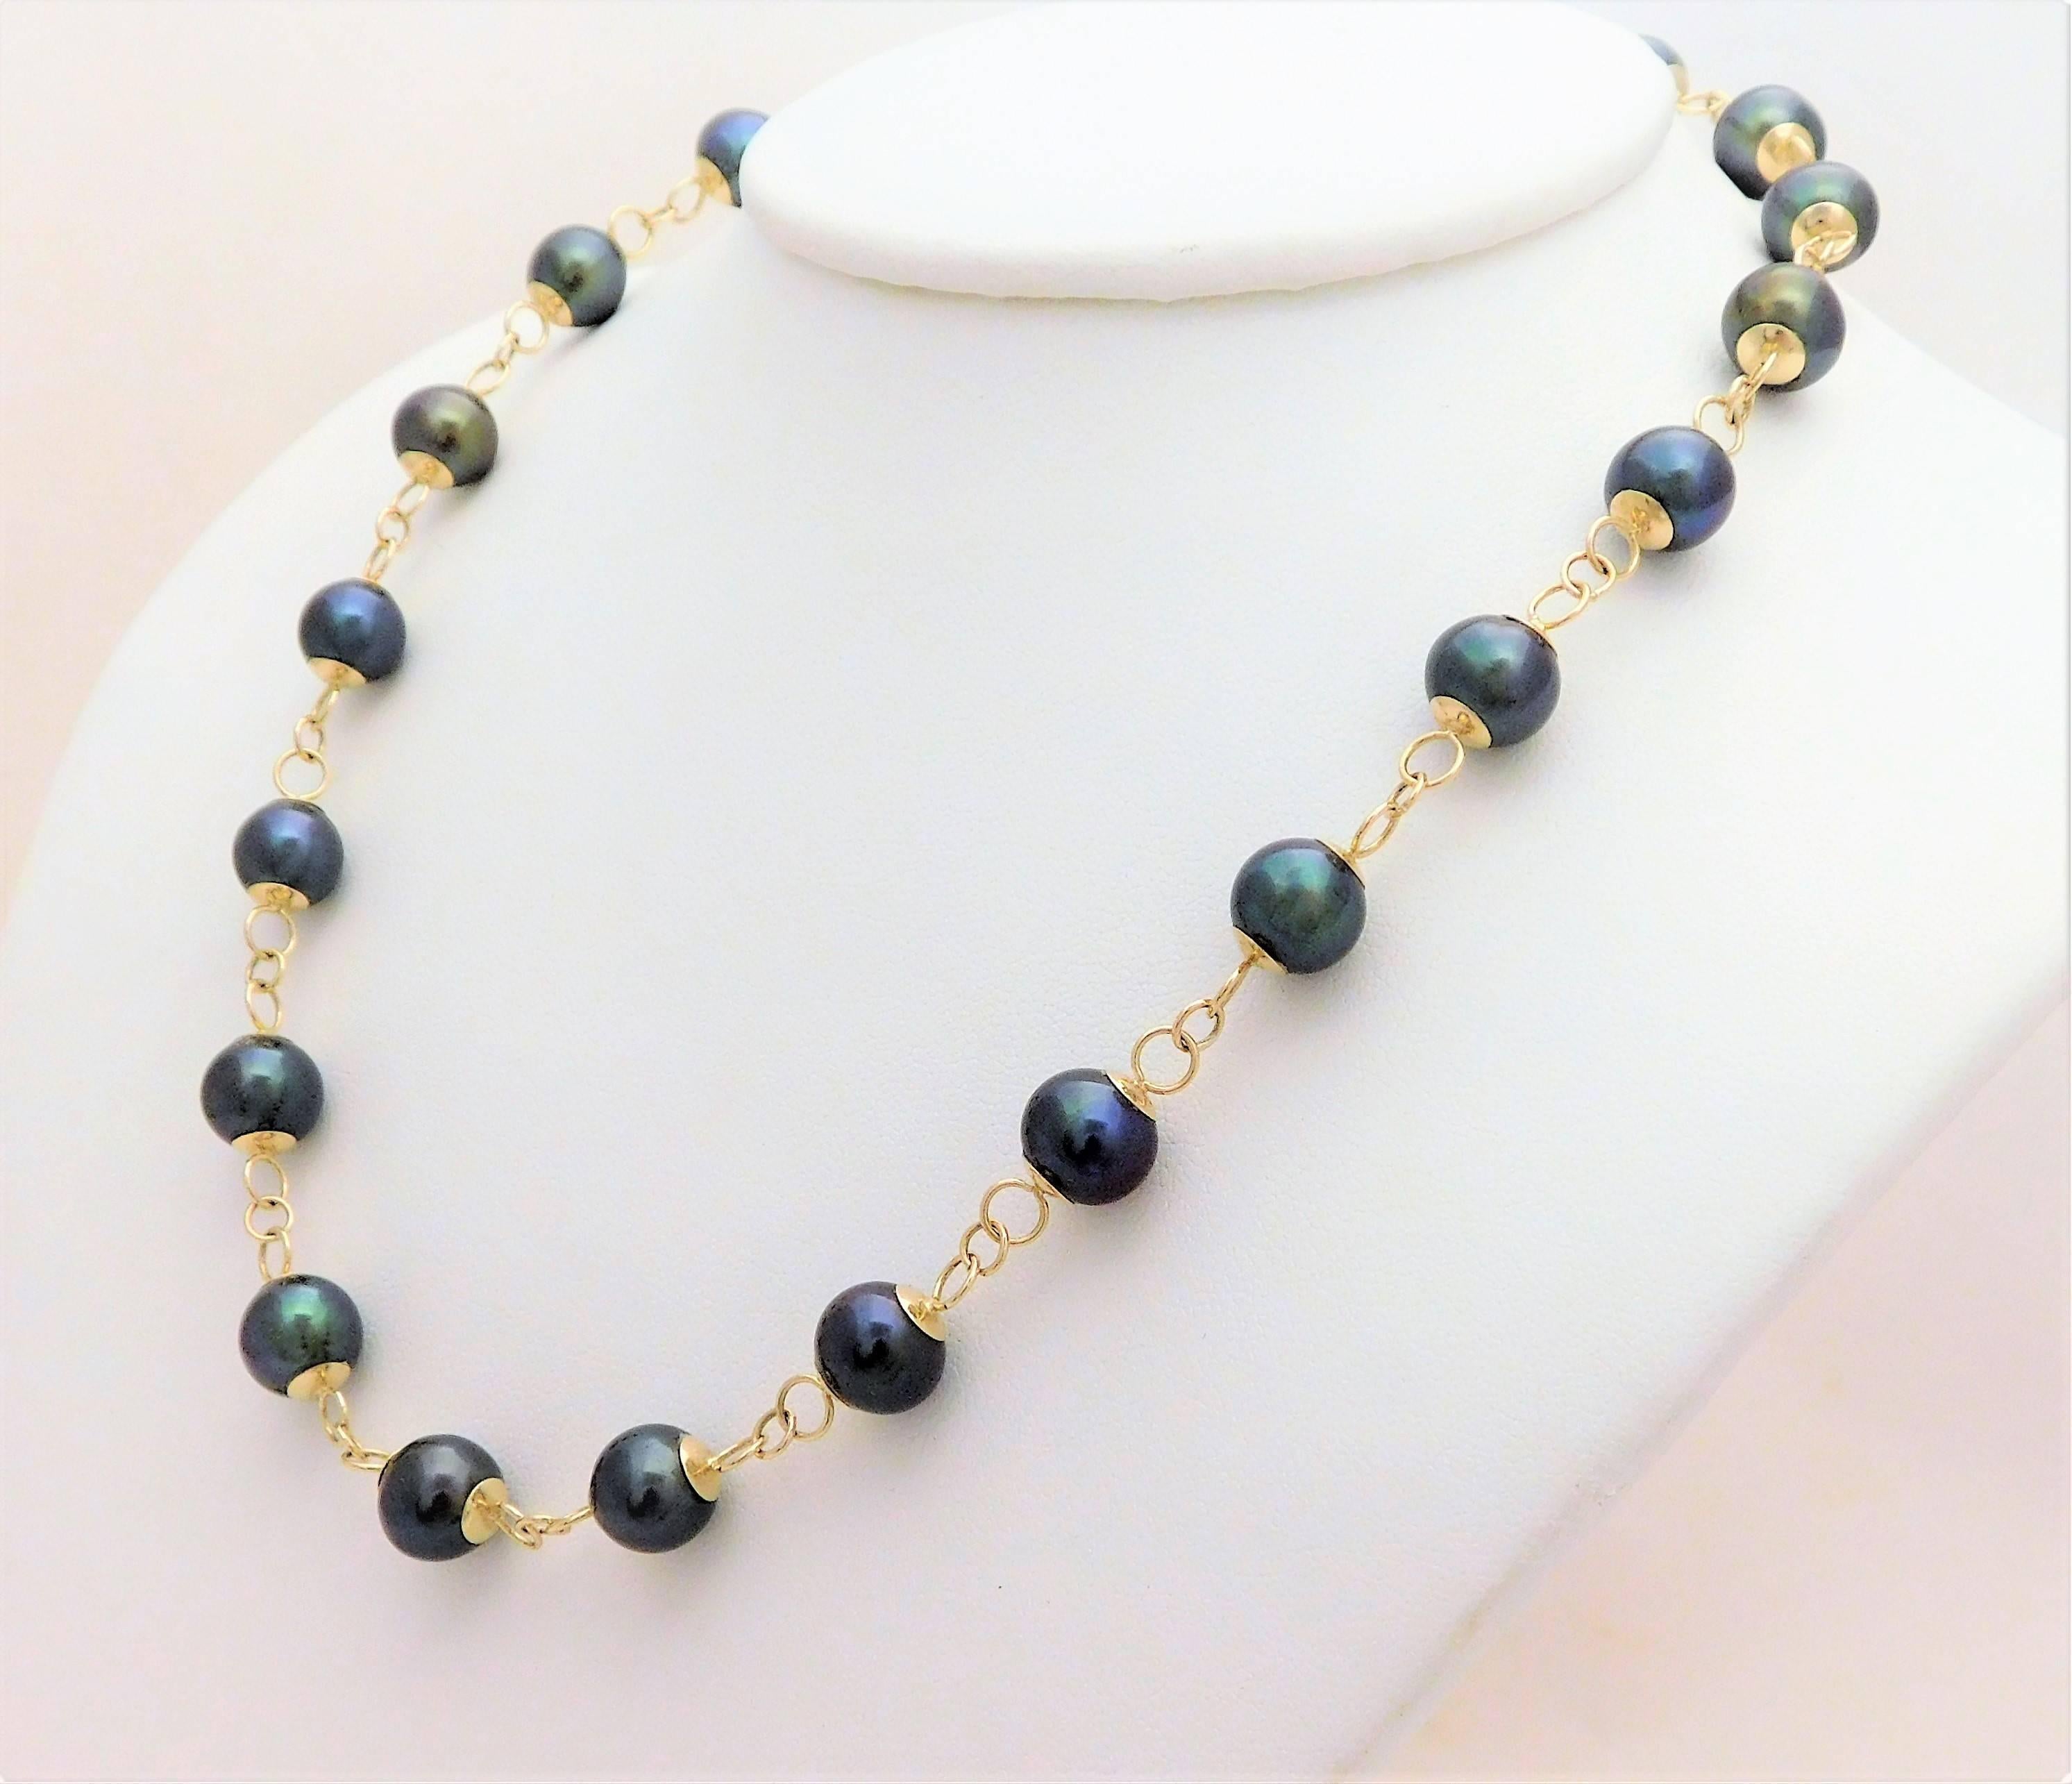 Vintage Handmade Black Pearl and 14 Karat Gold Necklace In Excellent Condition For Sale In Metairie, LA